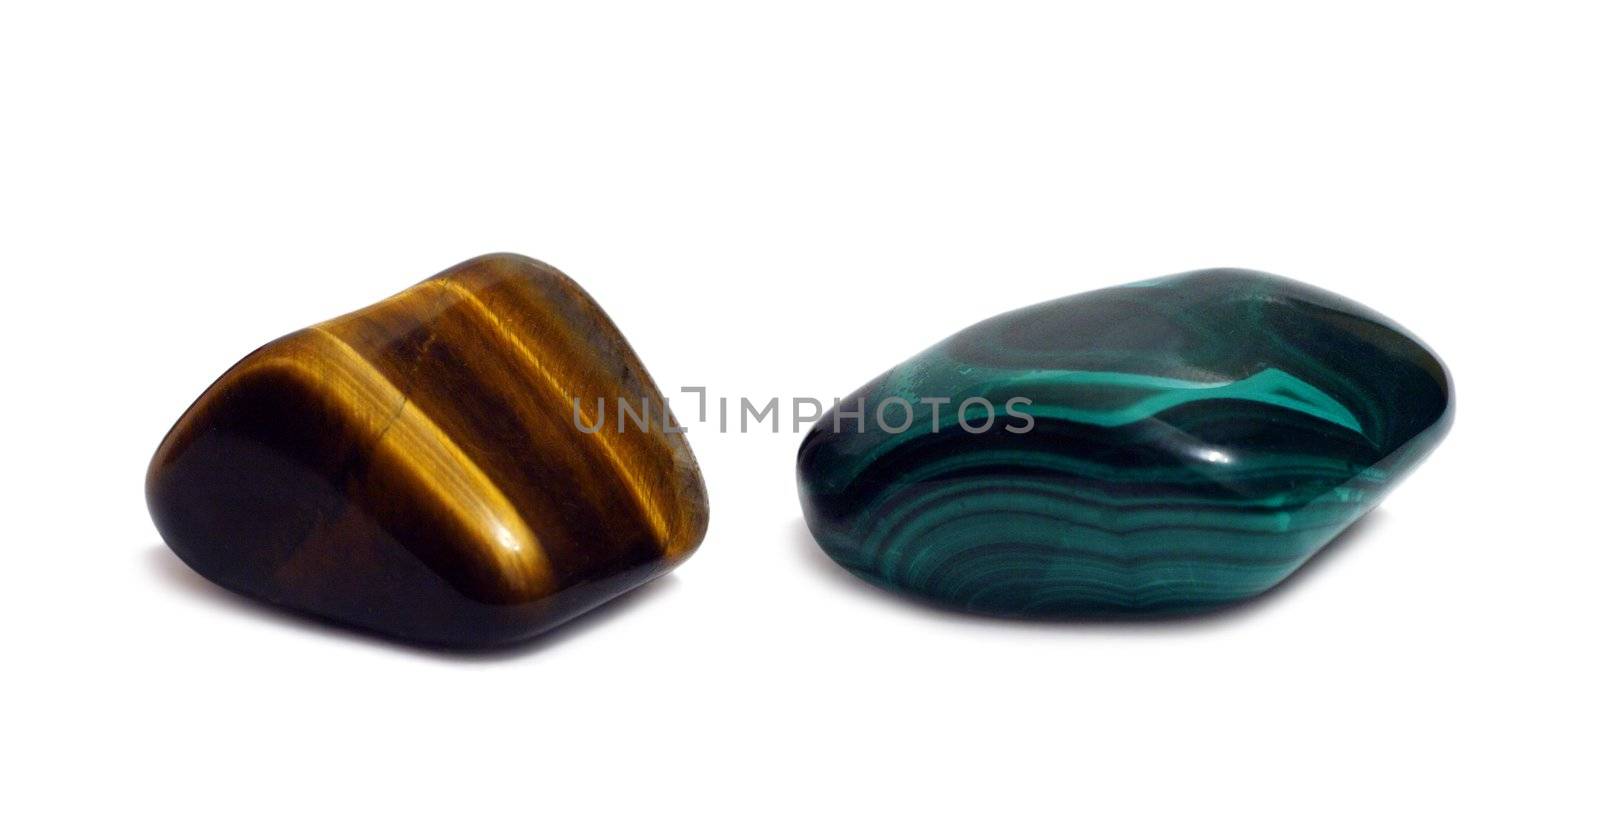 gem stones - agat and malachite by Mikko